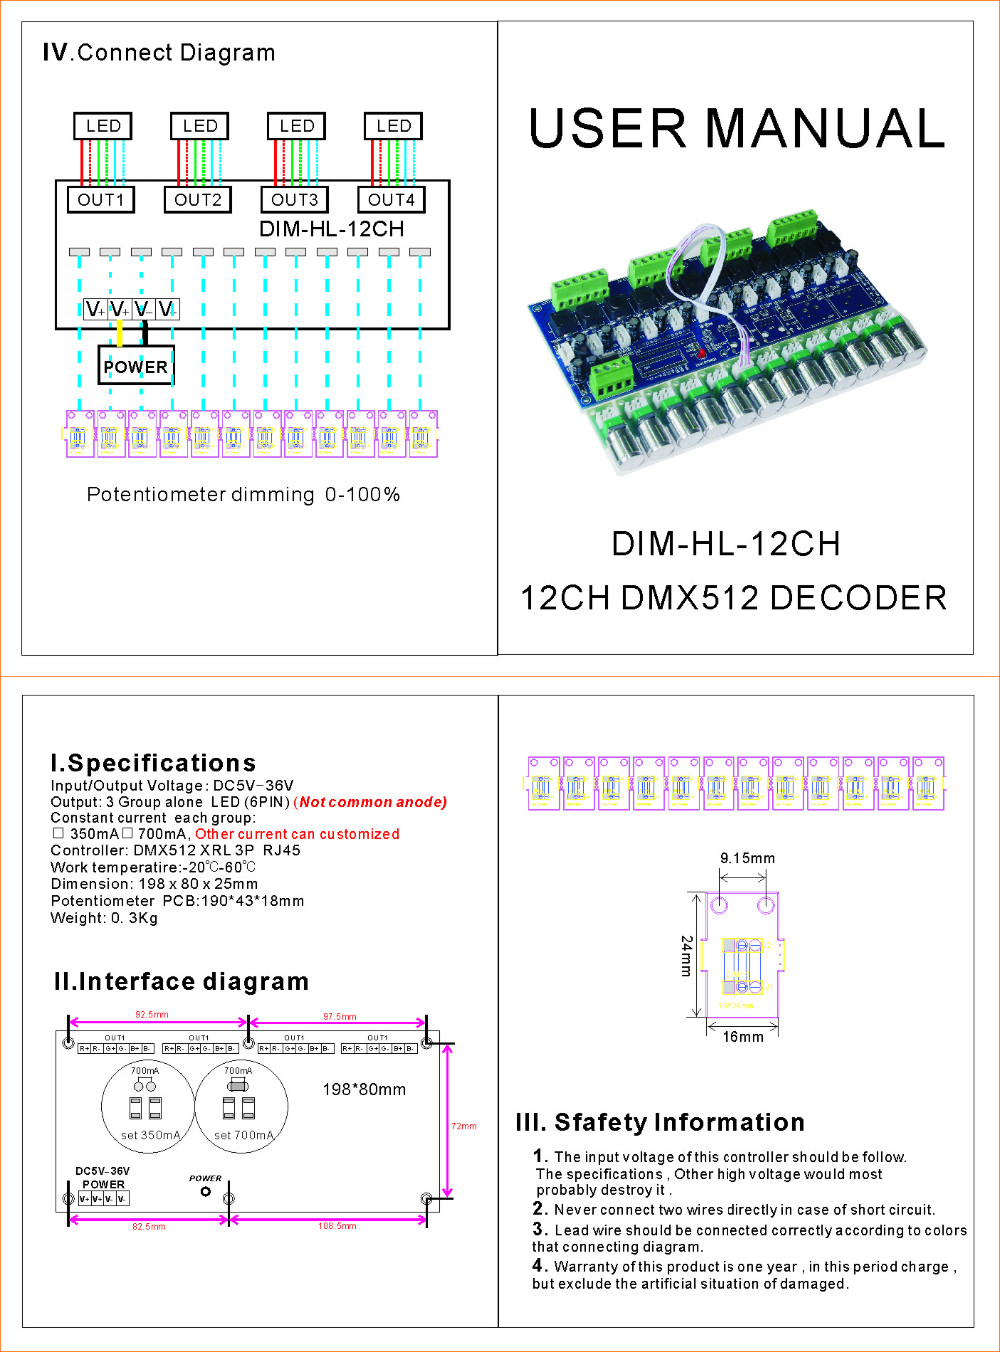 DMX_Controllers_and_Decoders_WS_DIM_12CH_350MA_3